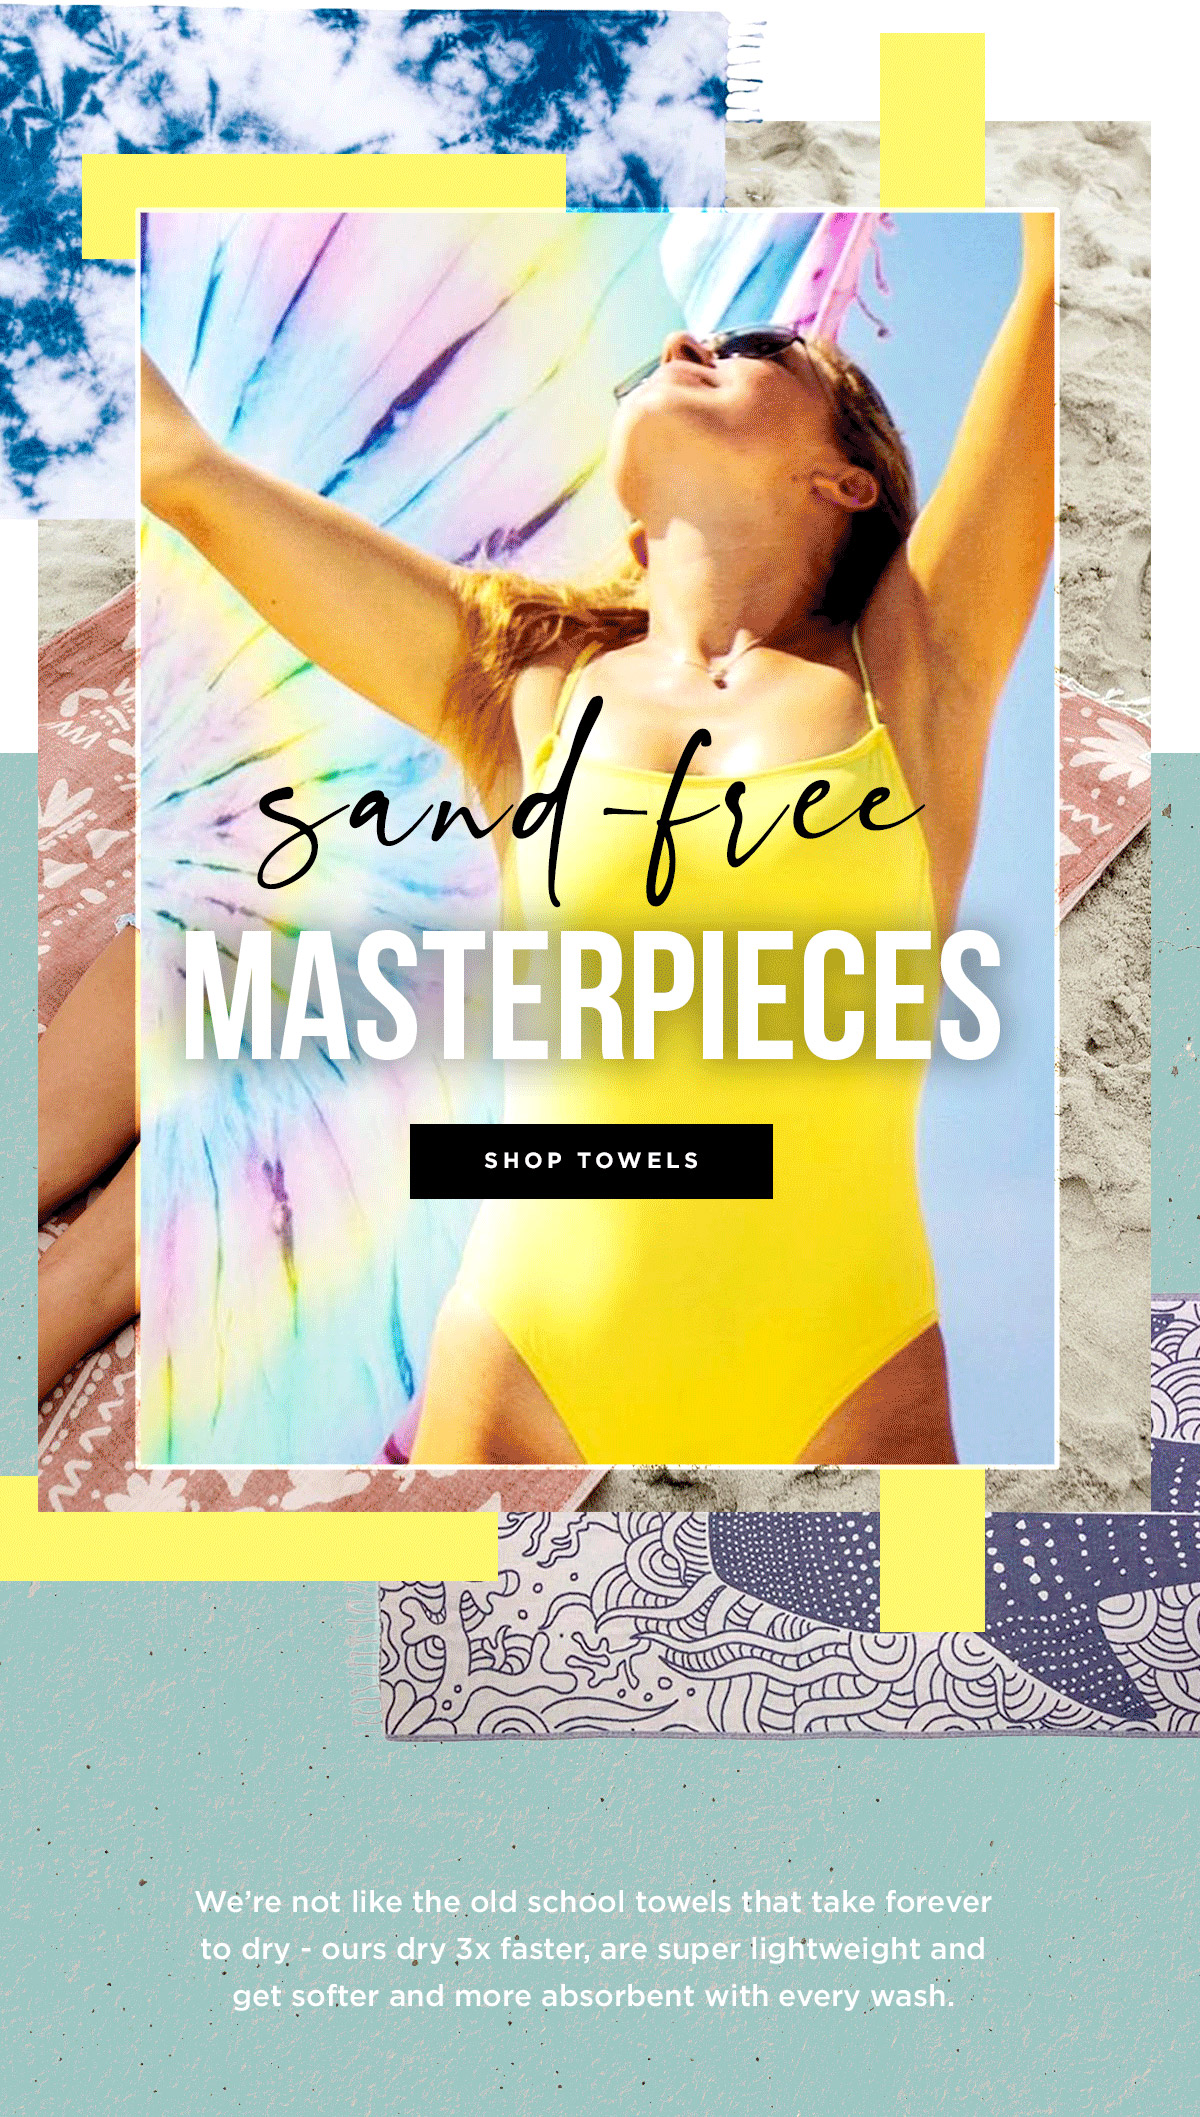 SAND-FREE MASTERPIECES